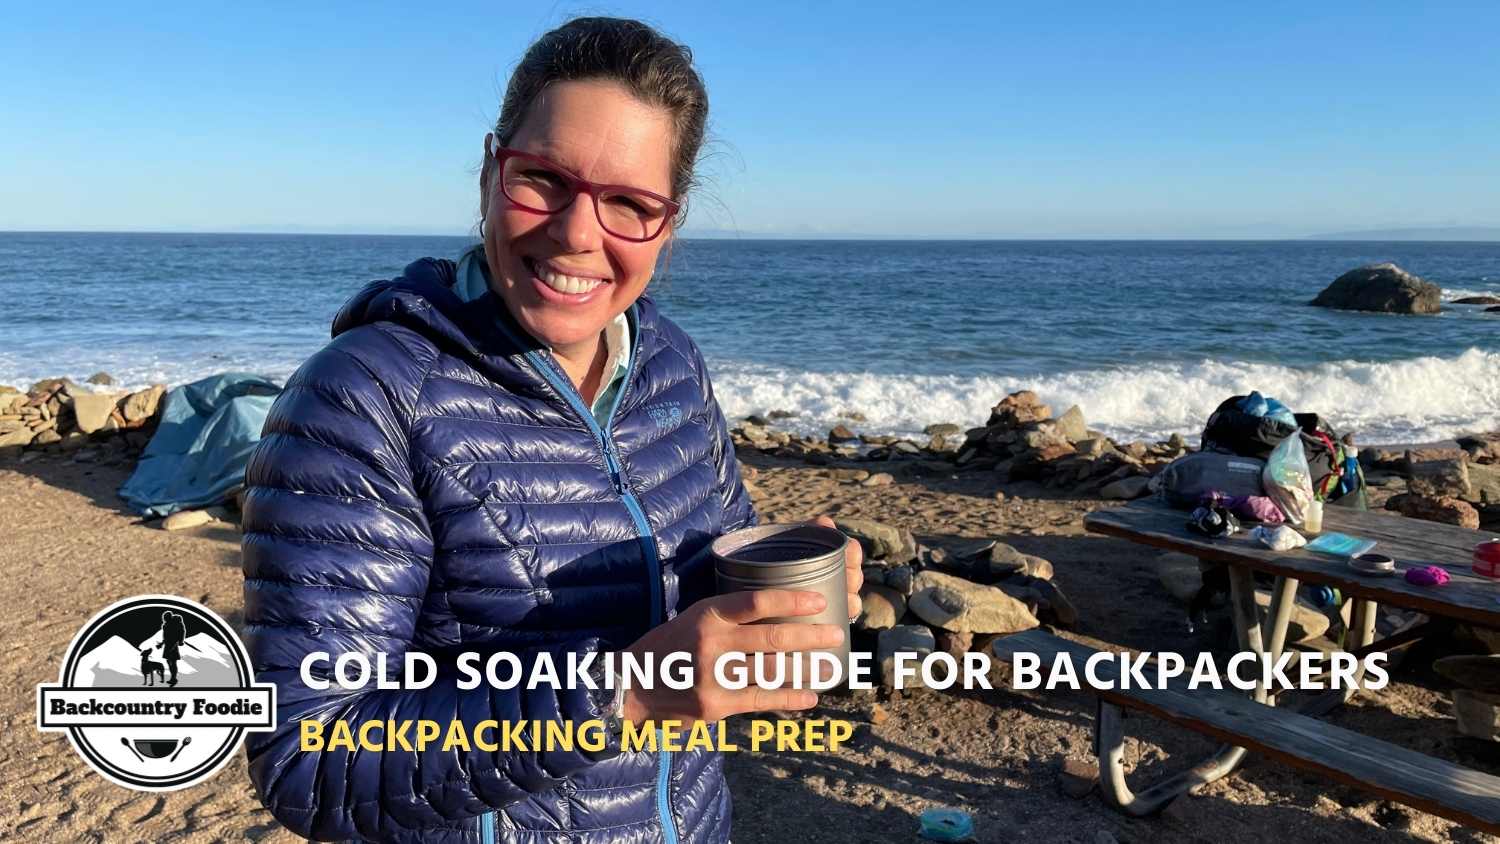 Backcountry Foodie Blog Cold Soaking Guide for Backpackers